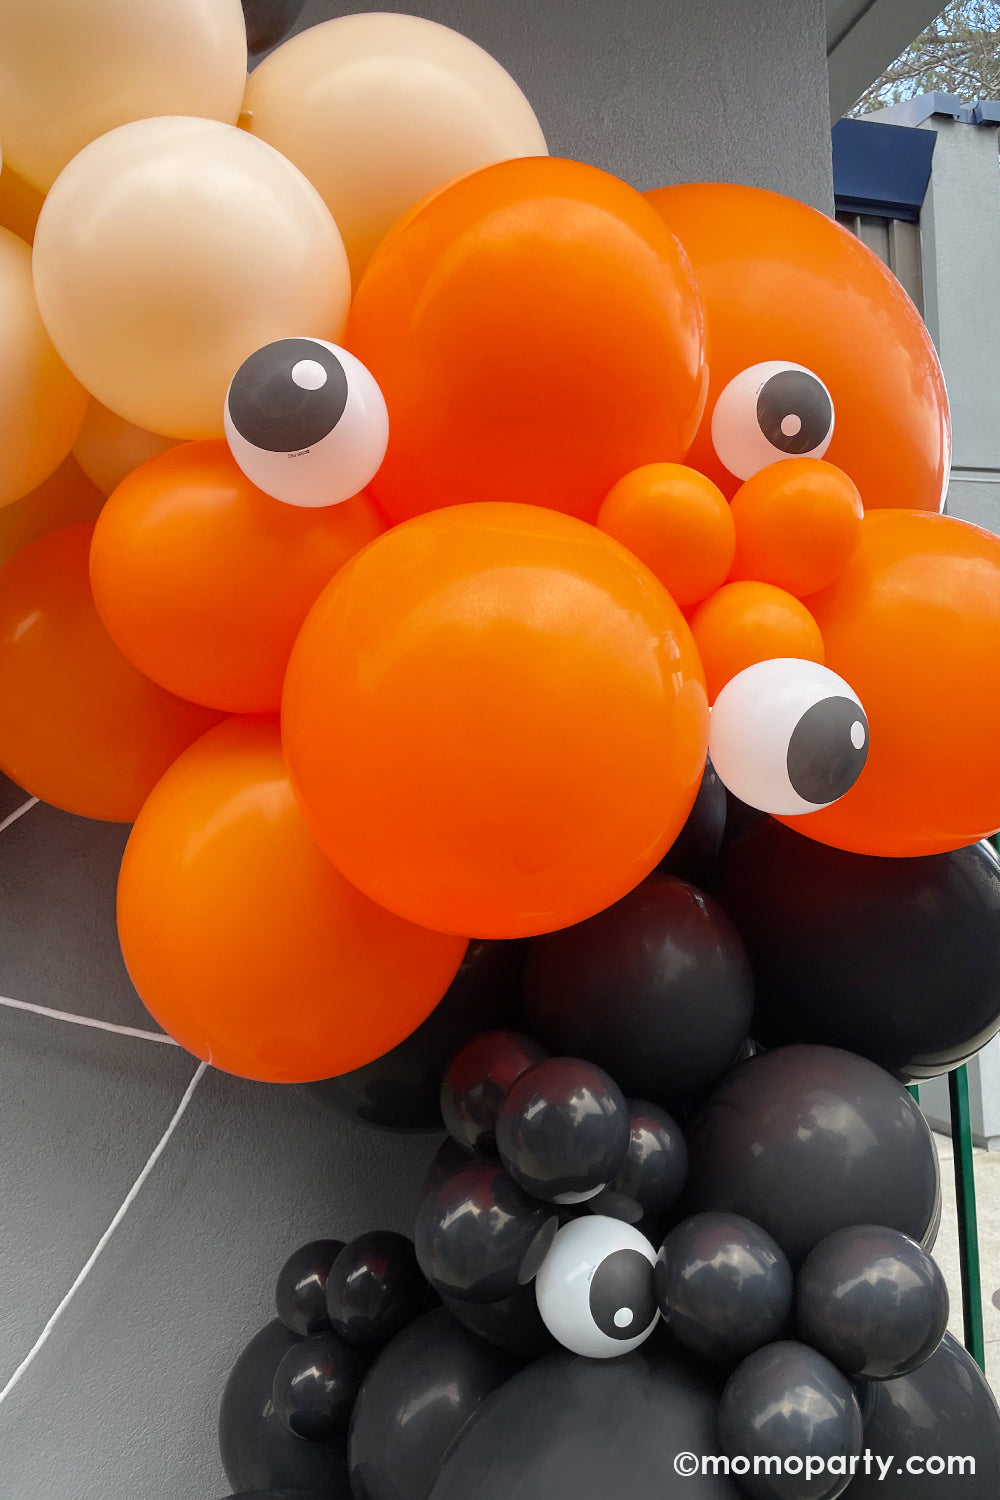 Halloween balloons by Momo Party in orange, blush, and black with qualatex' 5" eyeball balloons, it creates a spooky yet adorable decoration for kid's Halloween themed party or trick-or-treat celebration.